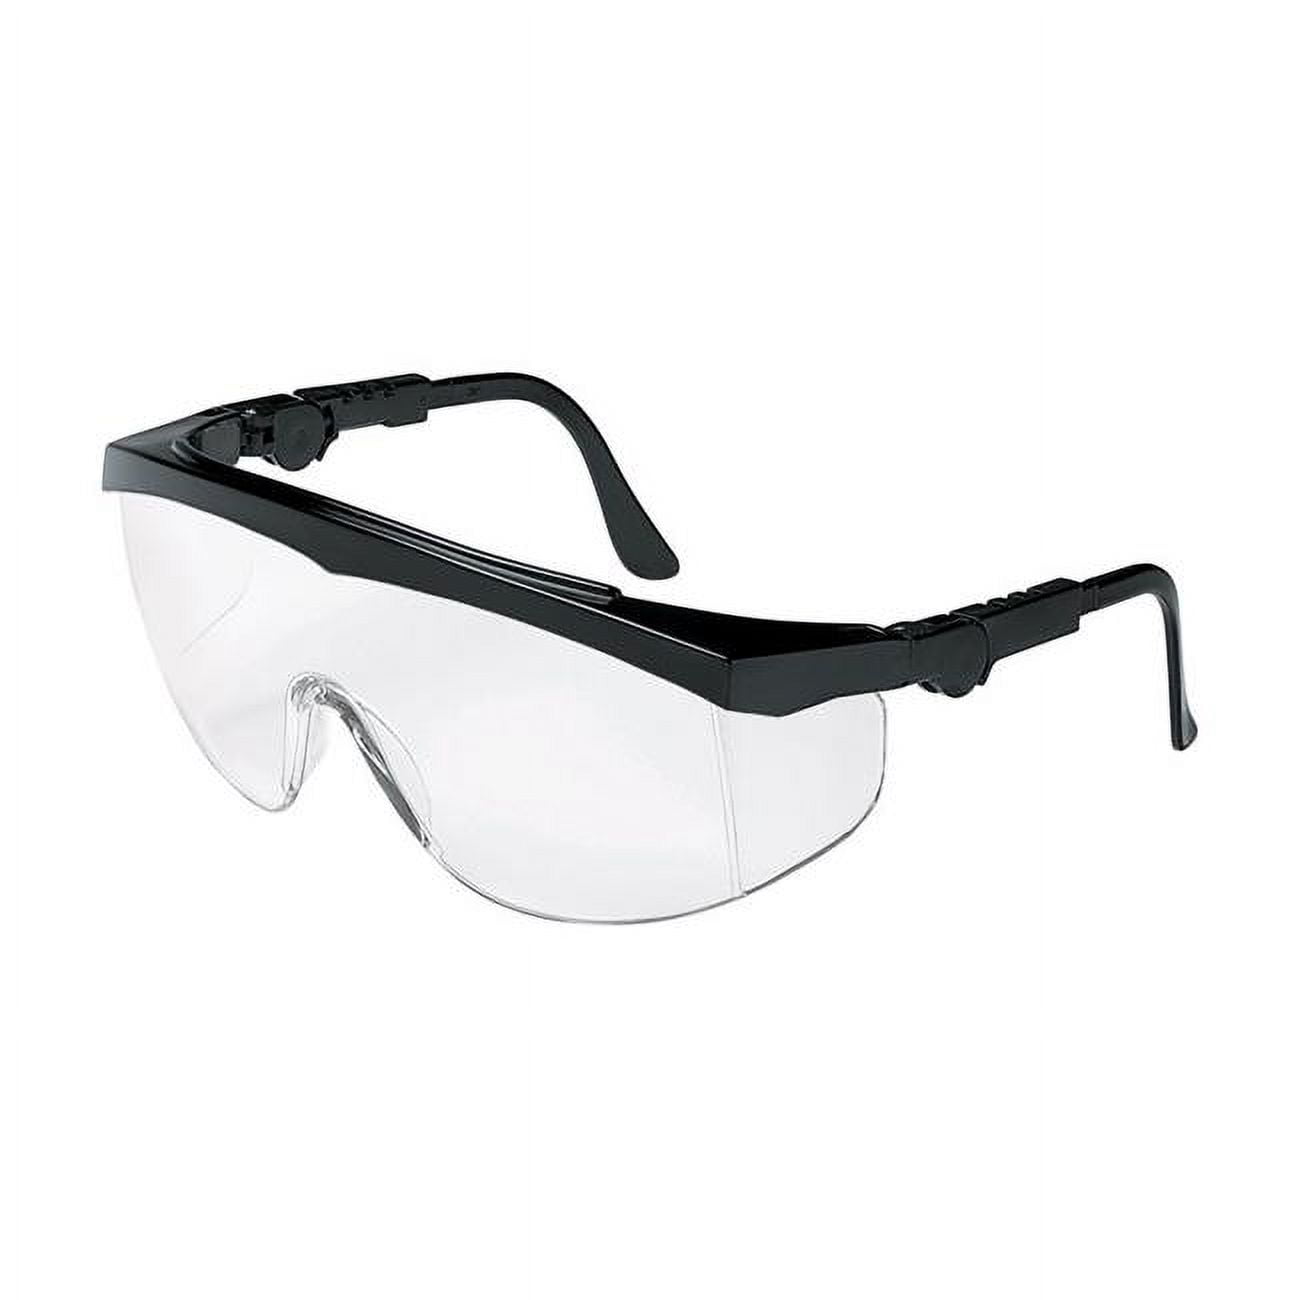 Mcr 2418622 Multi-purpose Safety Glasses Clear Lens With Black Frame With Clear Lens Frame - Pack Of 12